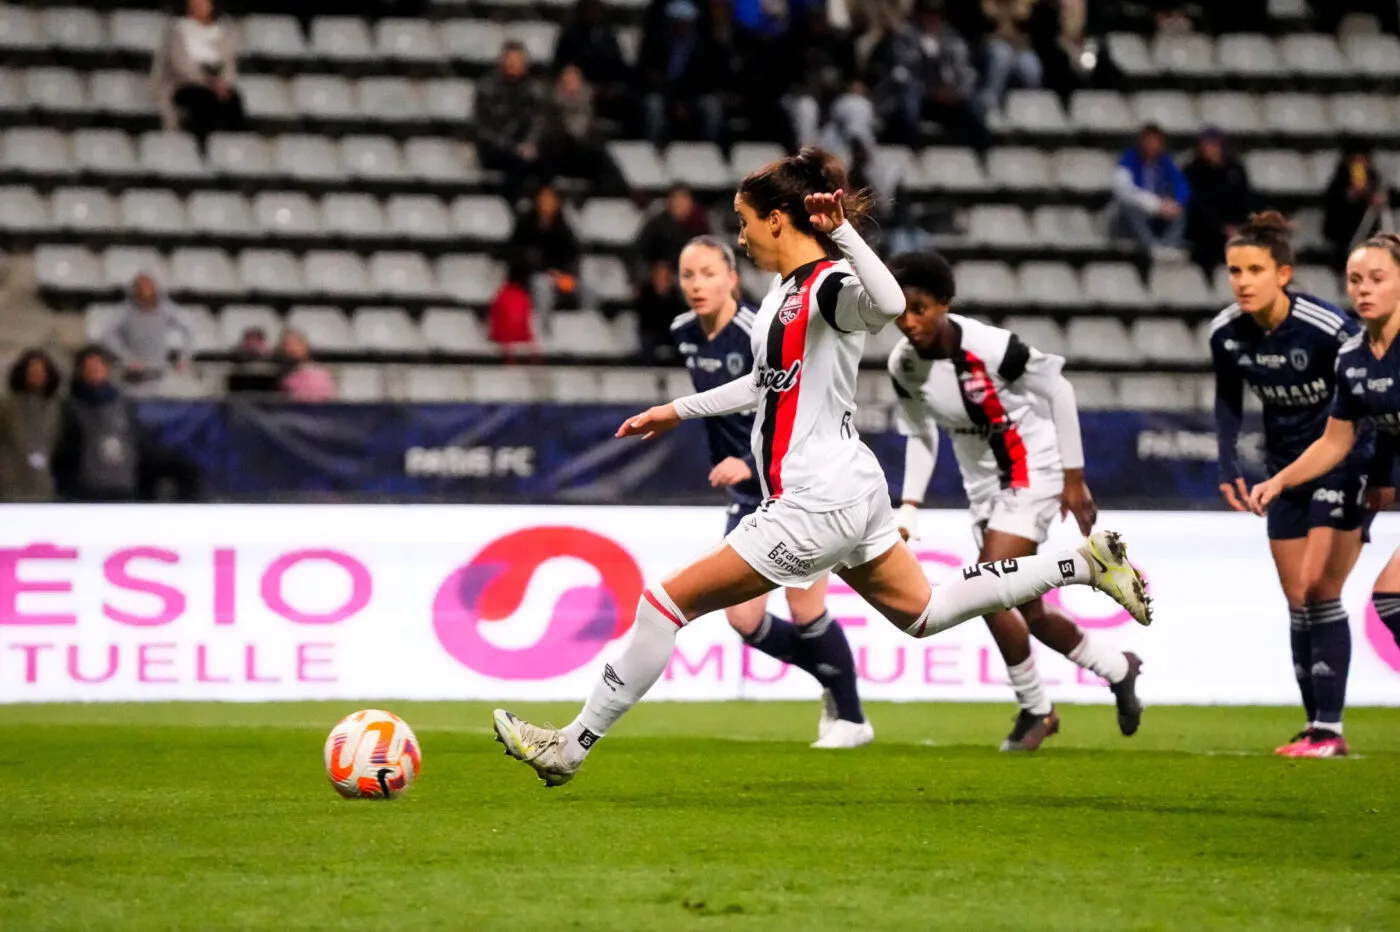 Anissa LAHMARI Of Guingamp score a goal during the Womens D1 Arkema match between Paris FC and Guingamp on March 31, 2023 in Paris, France. (Photo by Hugo Pfeiffer/Icon Sport)